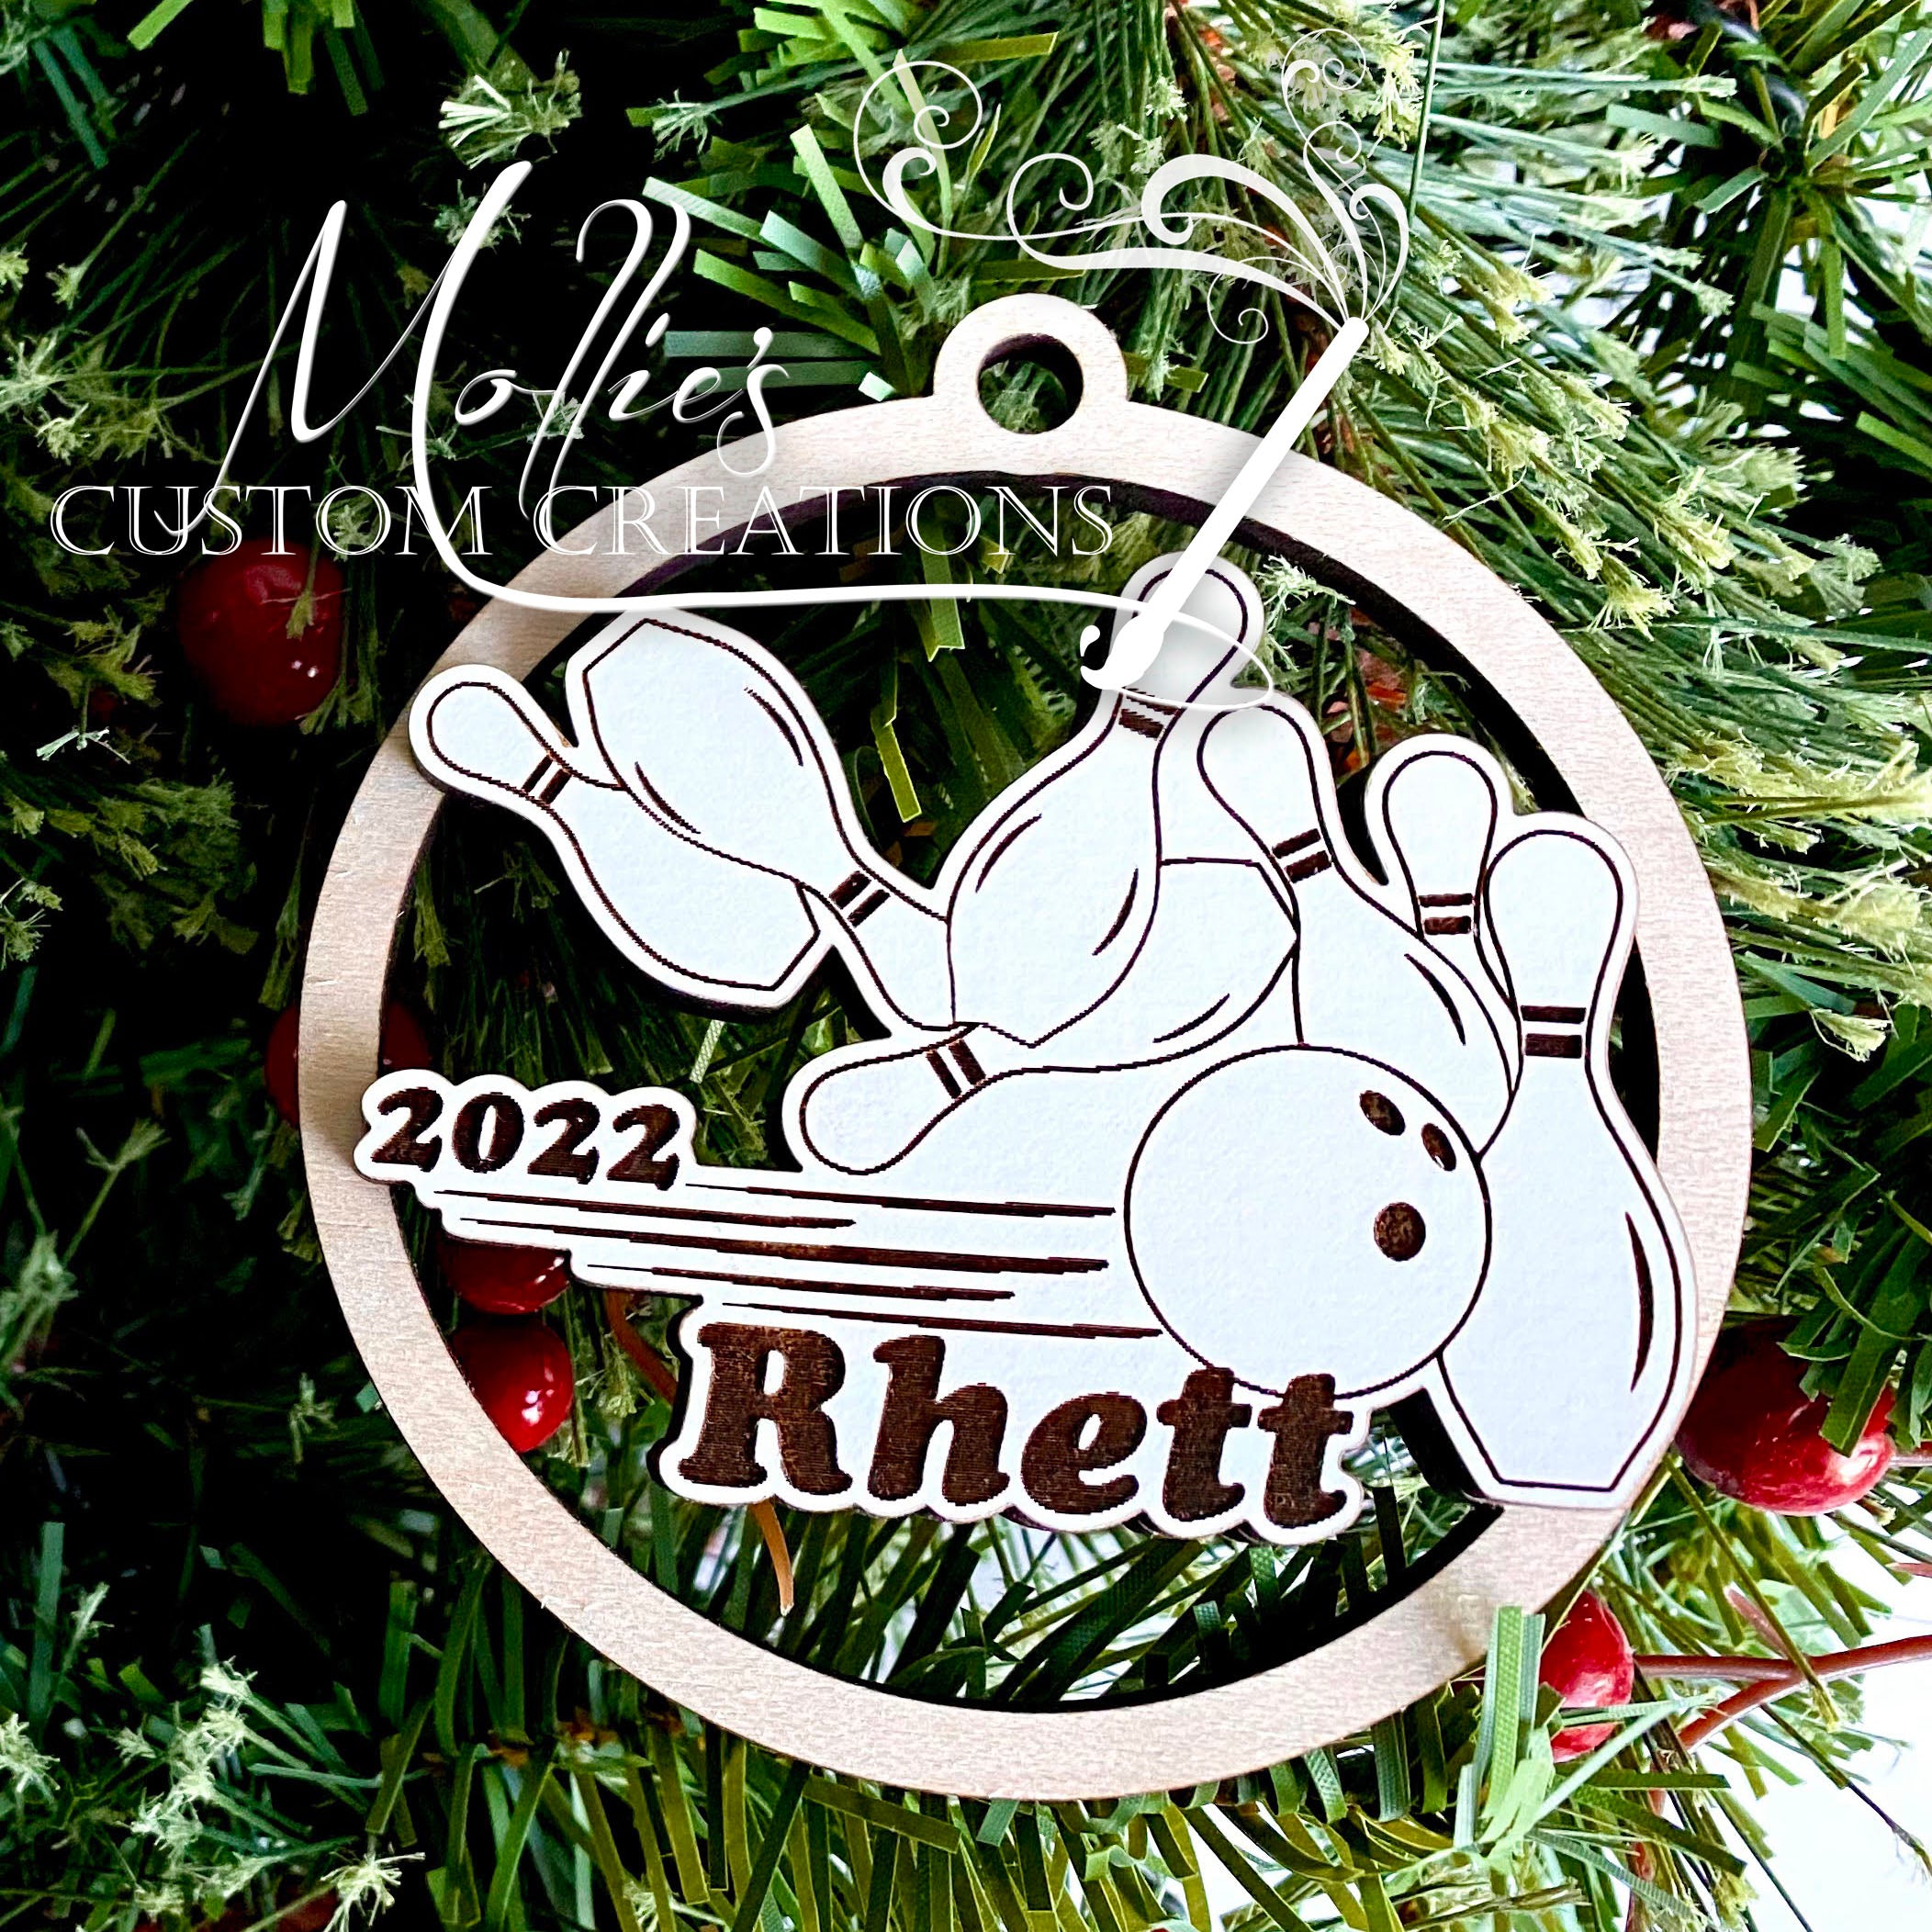 Personalized Ribbon Height Ornament, ROUND  Wooden Christmas ornament –  Mollie's Custom Creations